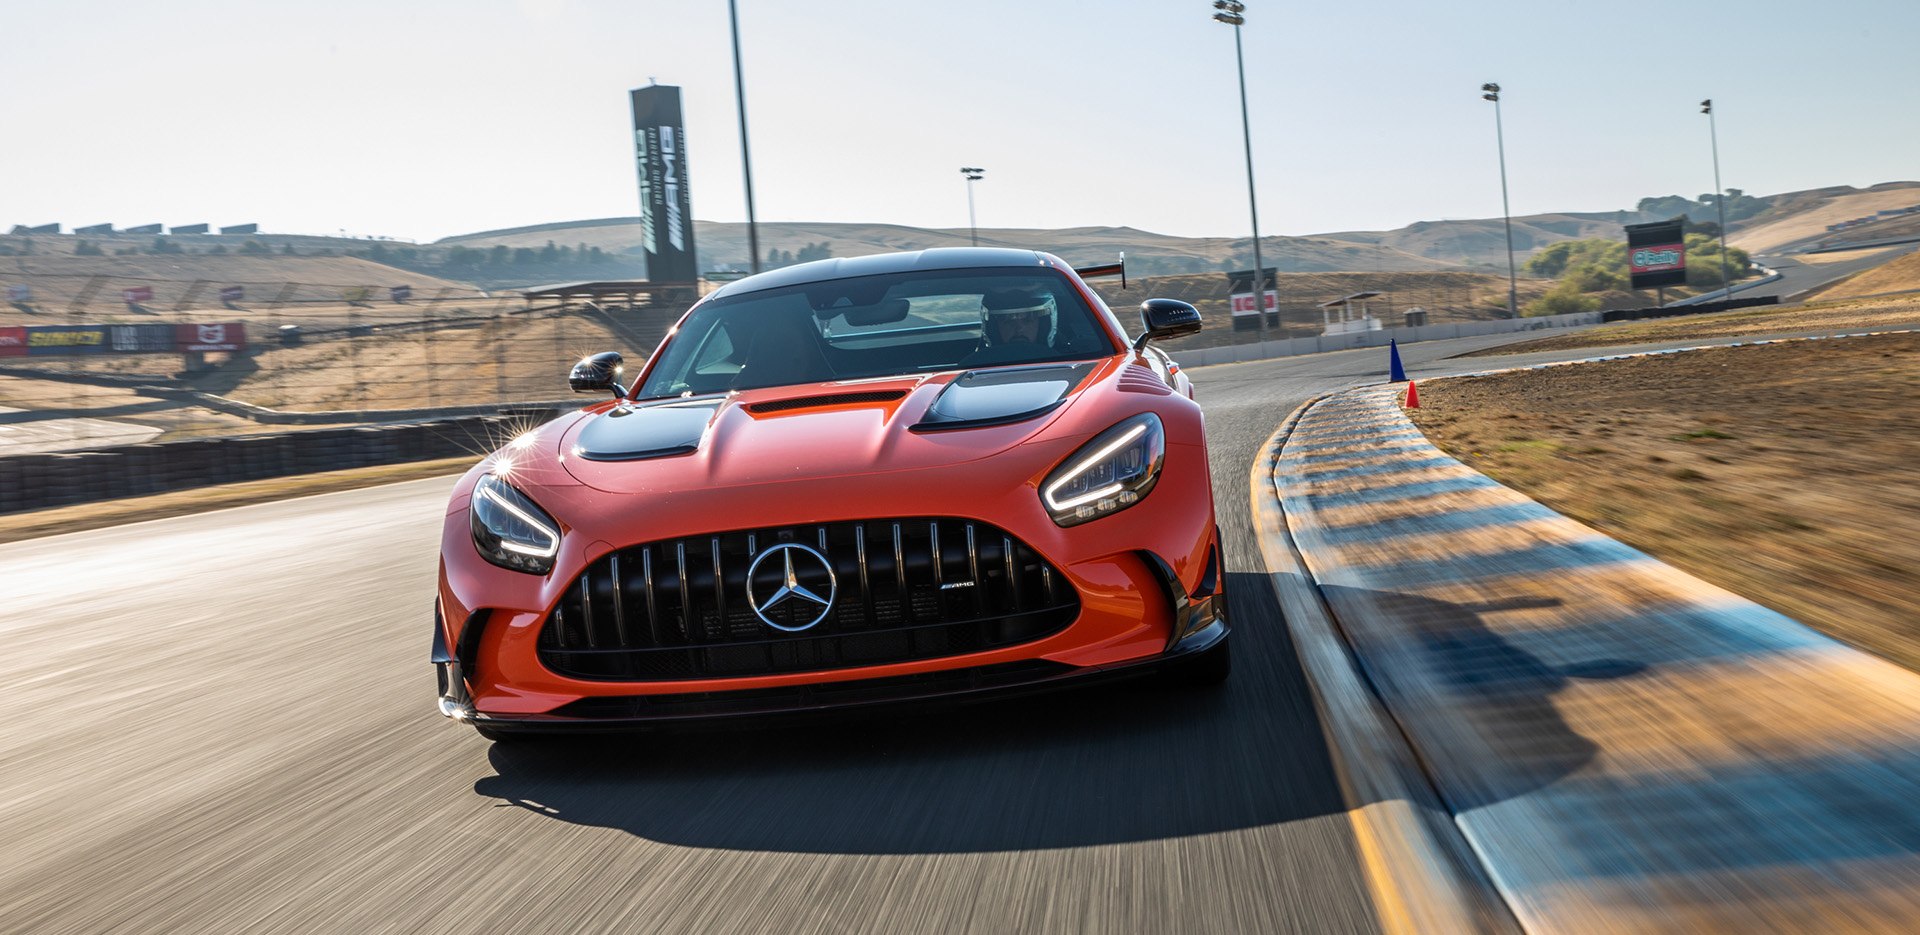 Red Mercedes AMG Vehicle  on Sonoma Raceway Track